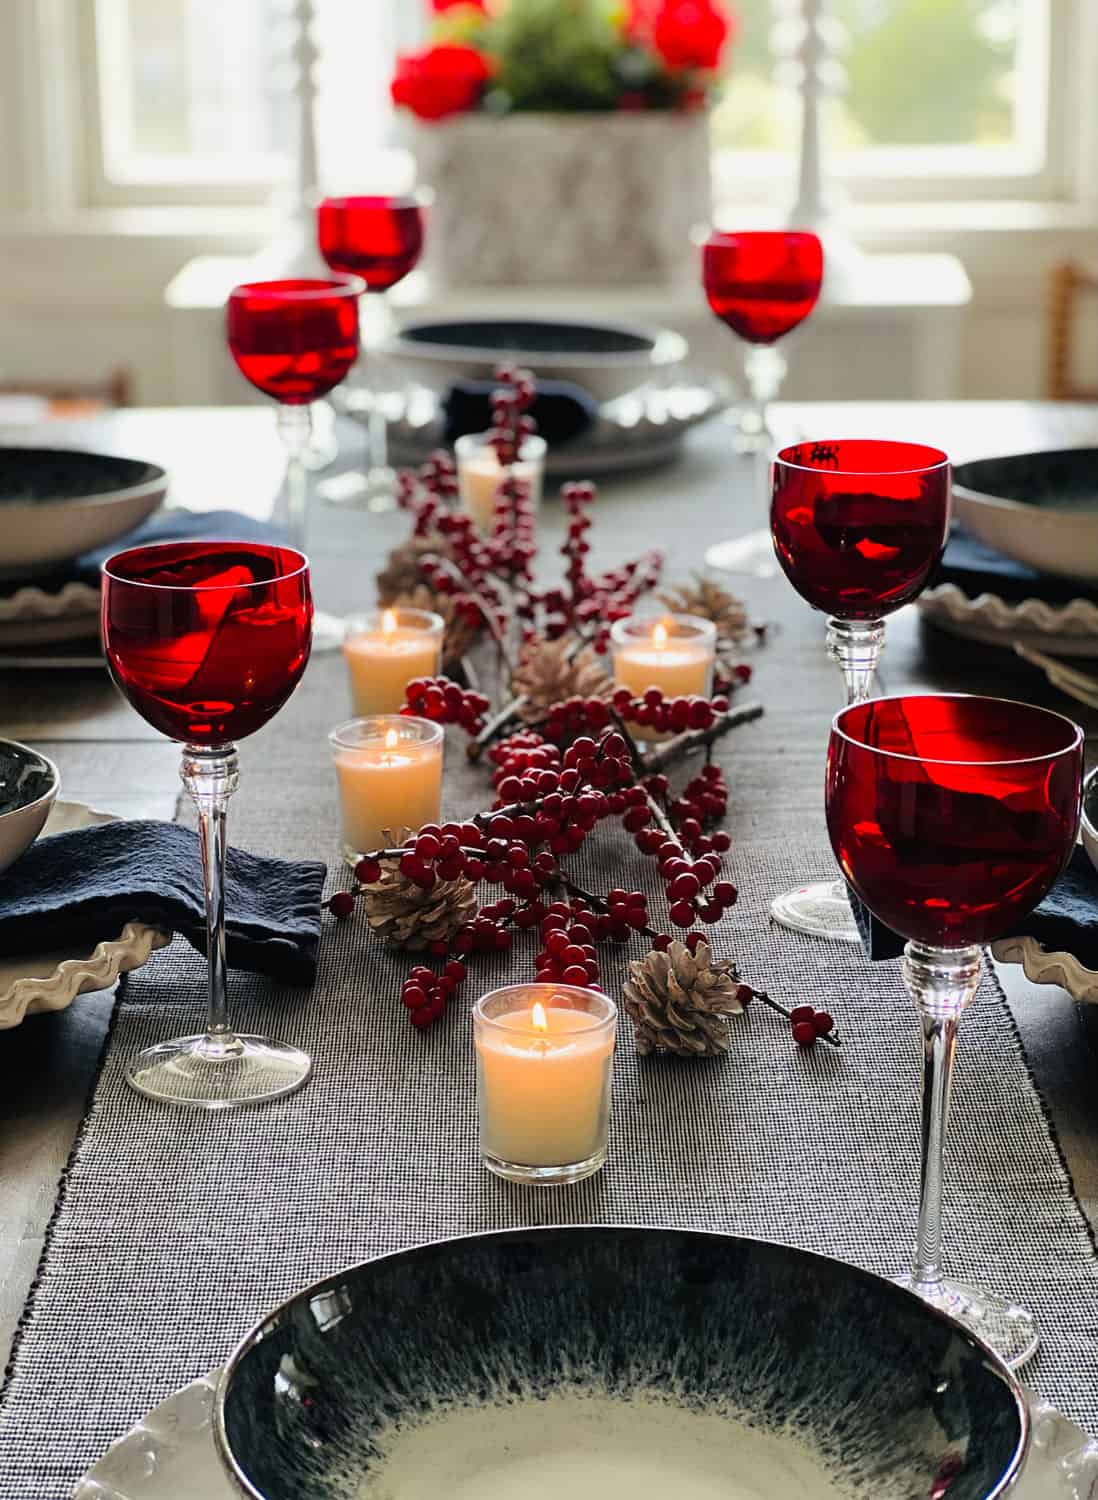 Mary Ann Pickett's Blue and Red Table setting